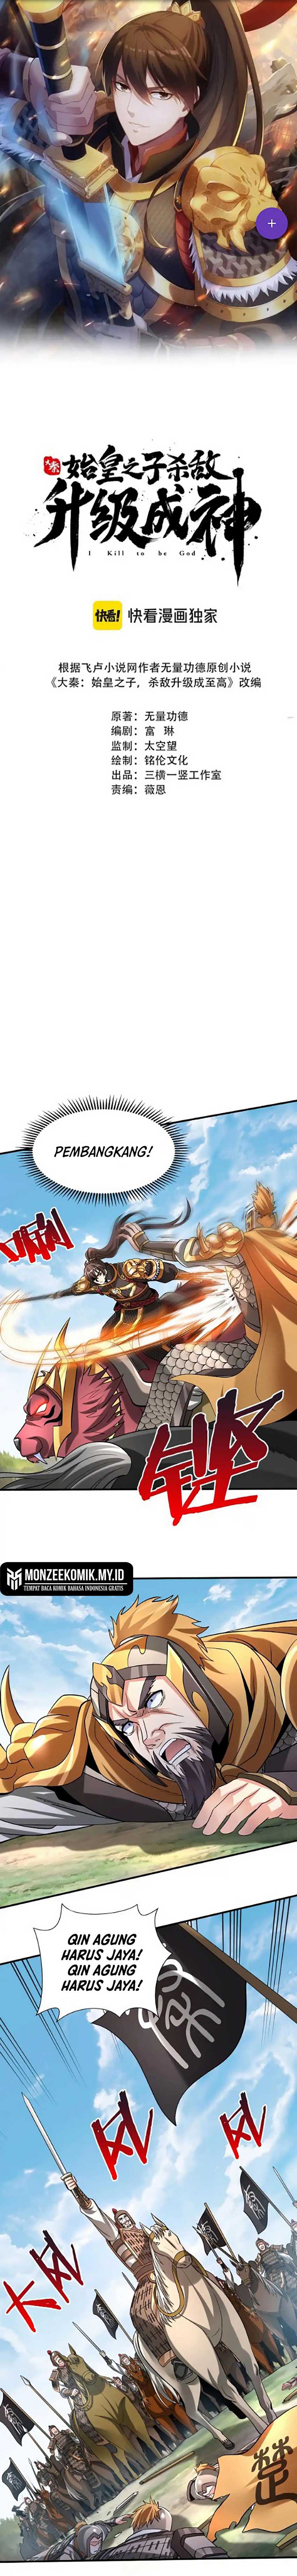 The Son Of The First Emperor Kills Enemies And Becomes A God Chapter 85